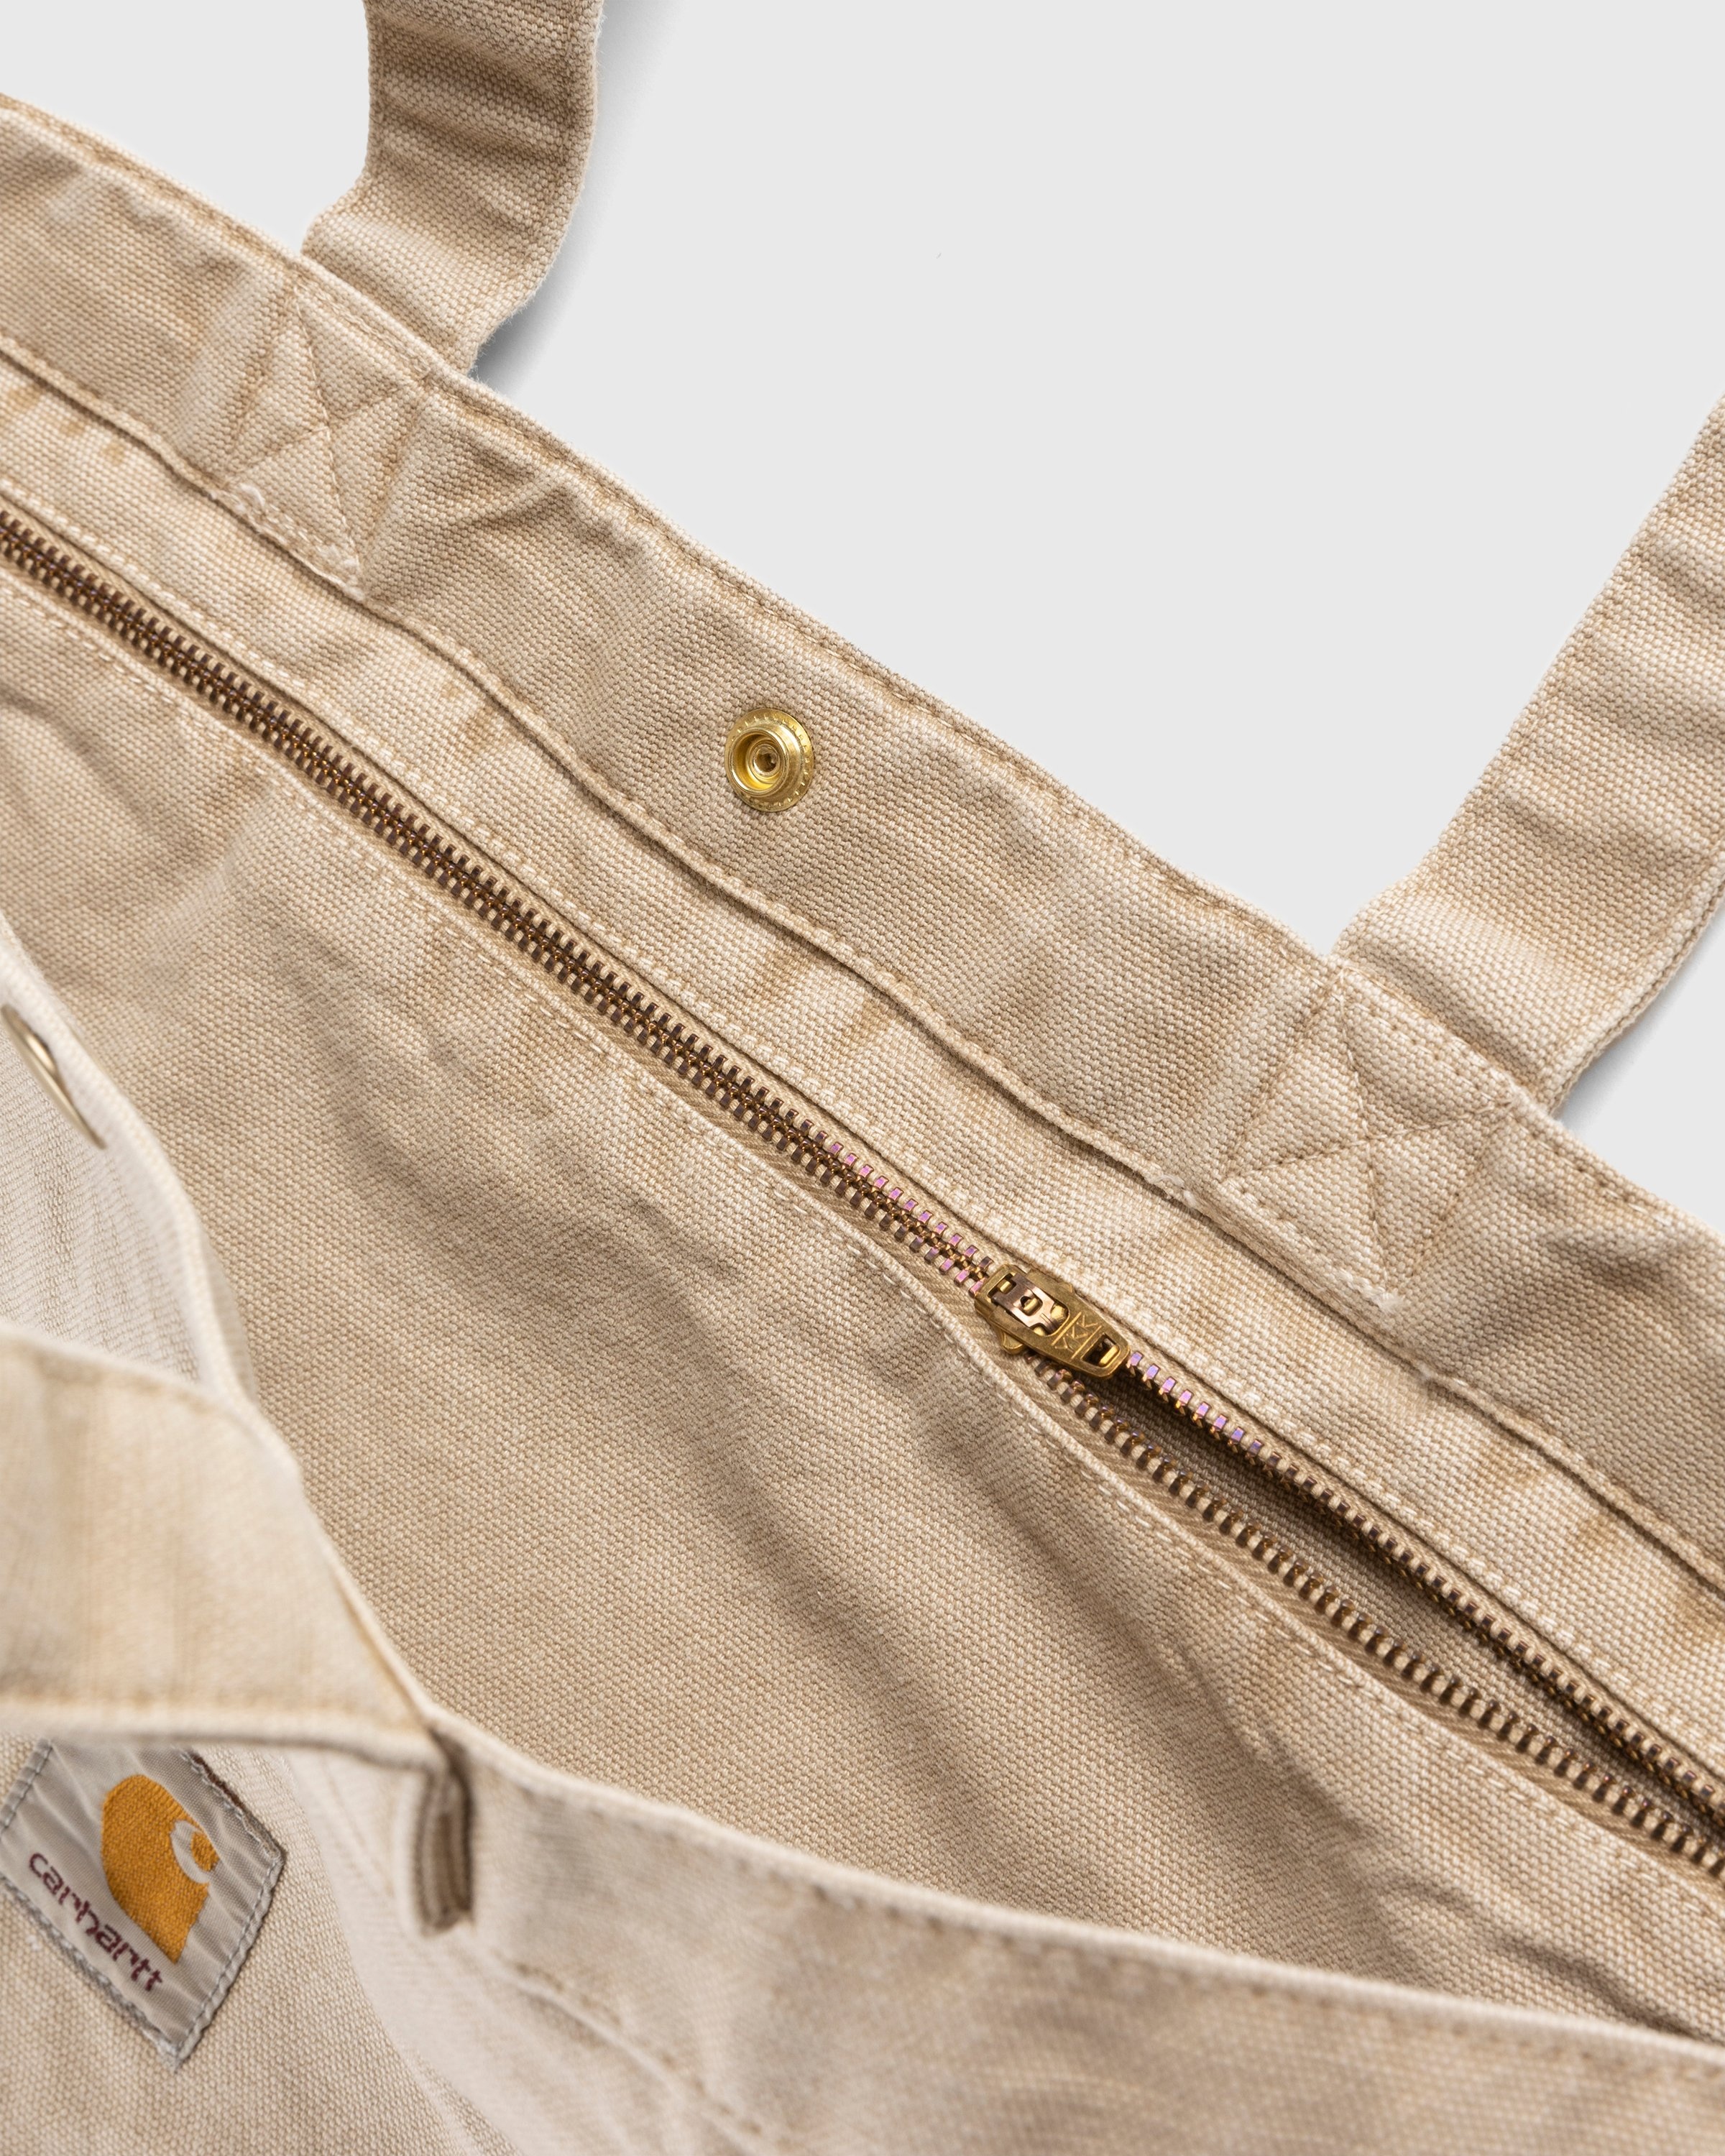 Carhartt WIP – Large Bayfield Tote Dusty Hamilton Brown Faded - Tote Bags - Brown - Image 6